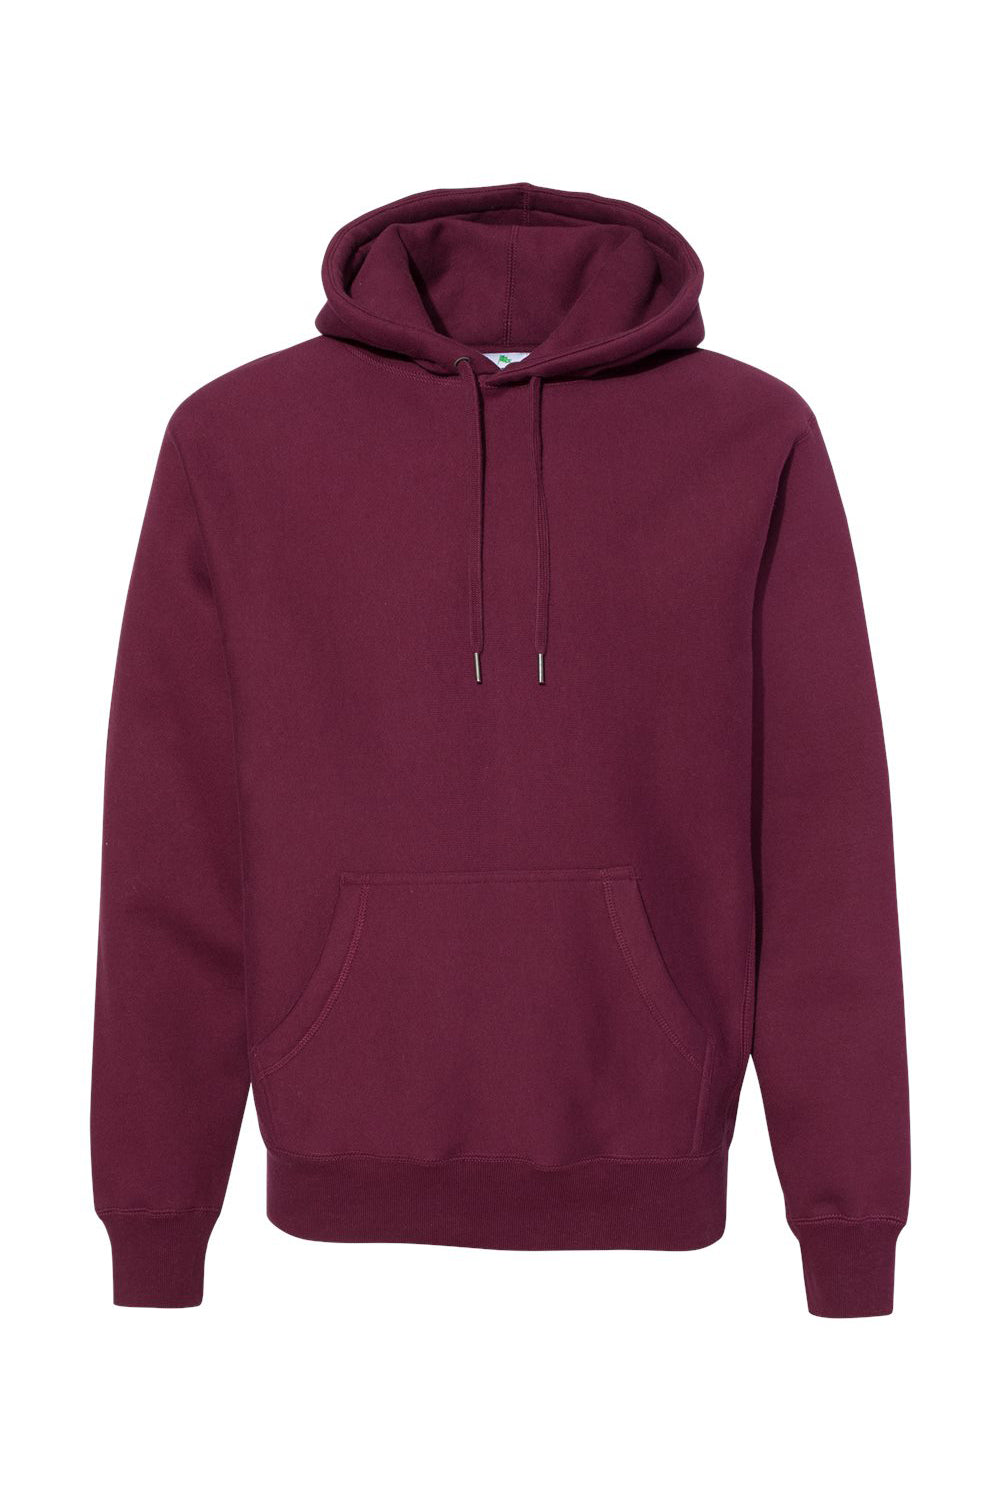 Independent Trading Co. IND5000P Mens Legend Hooded Sweatshirt Hoodie Maroon Flat Front